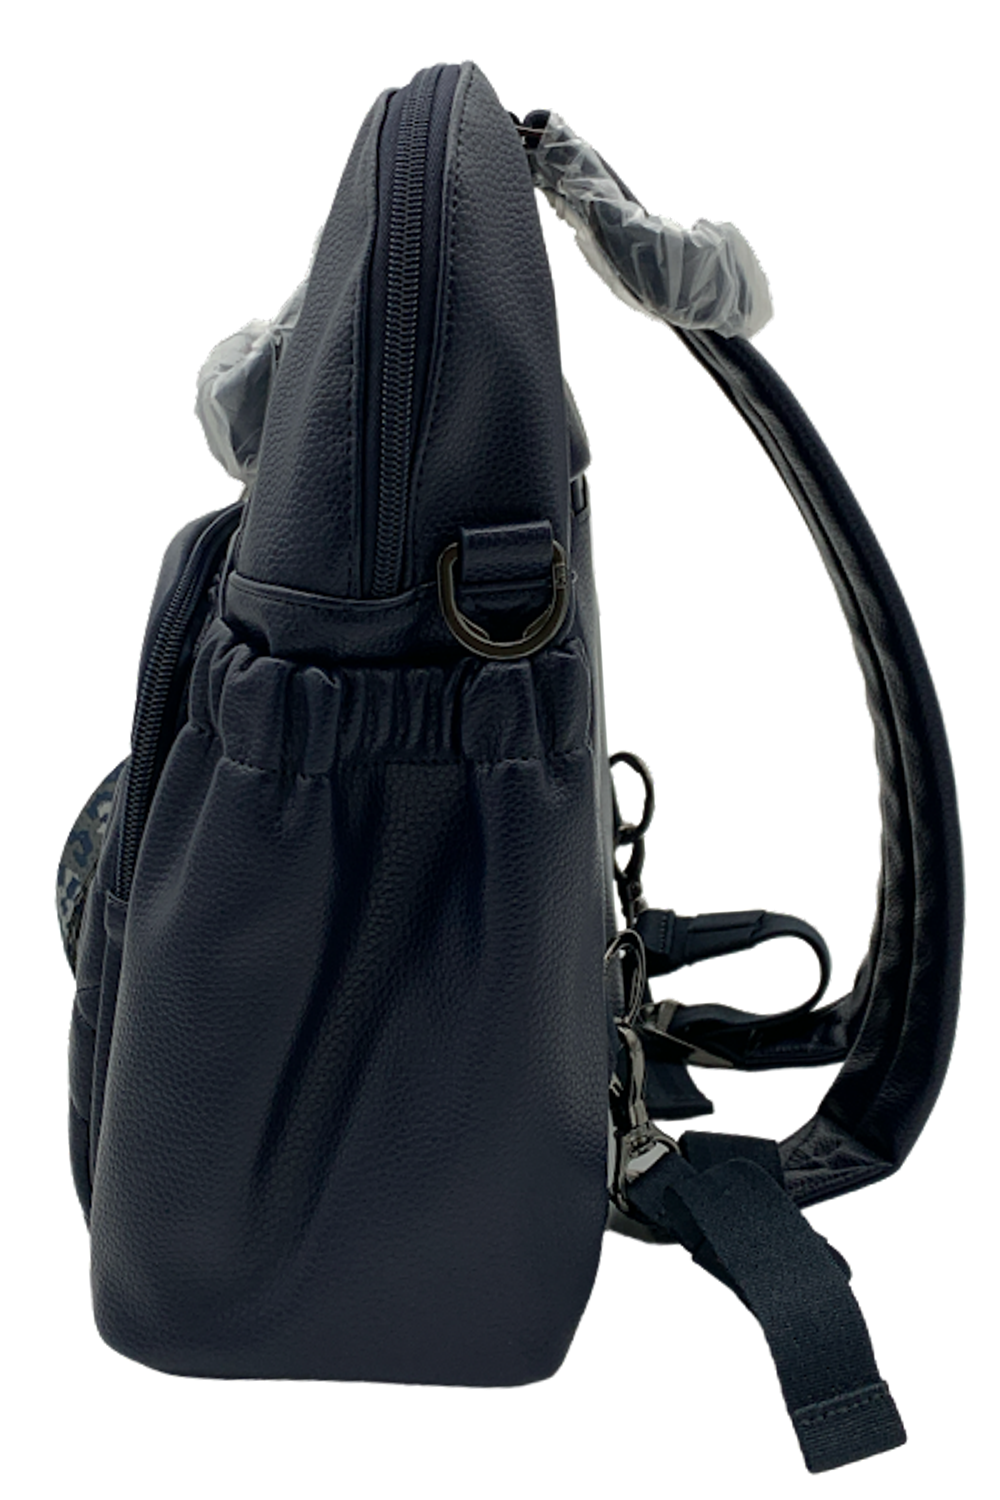 Lug Classic VL Convertible Backpack - Canter ,Black